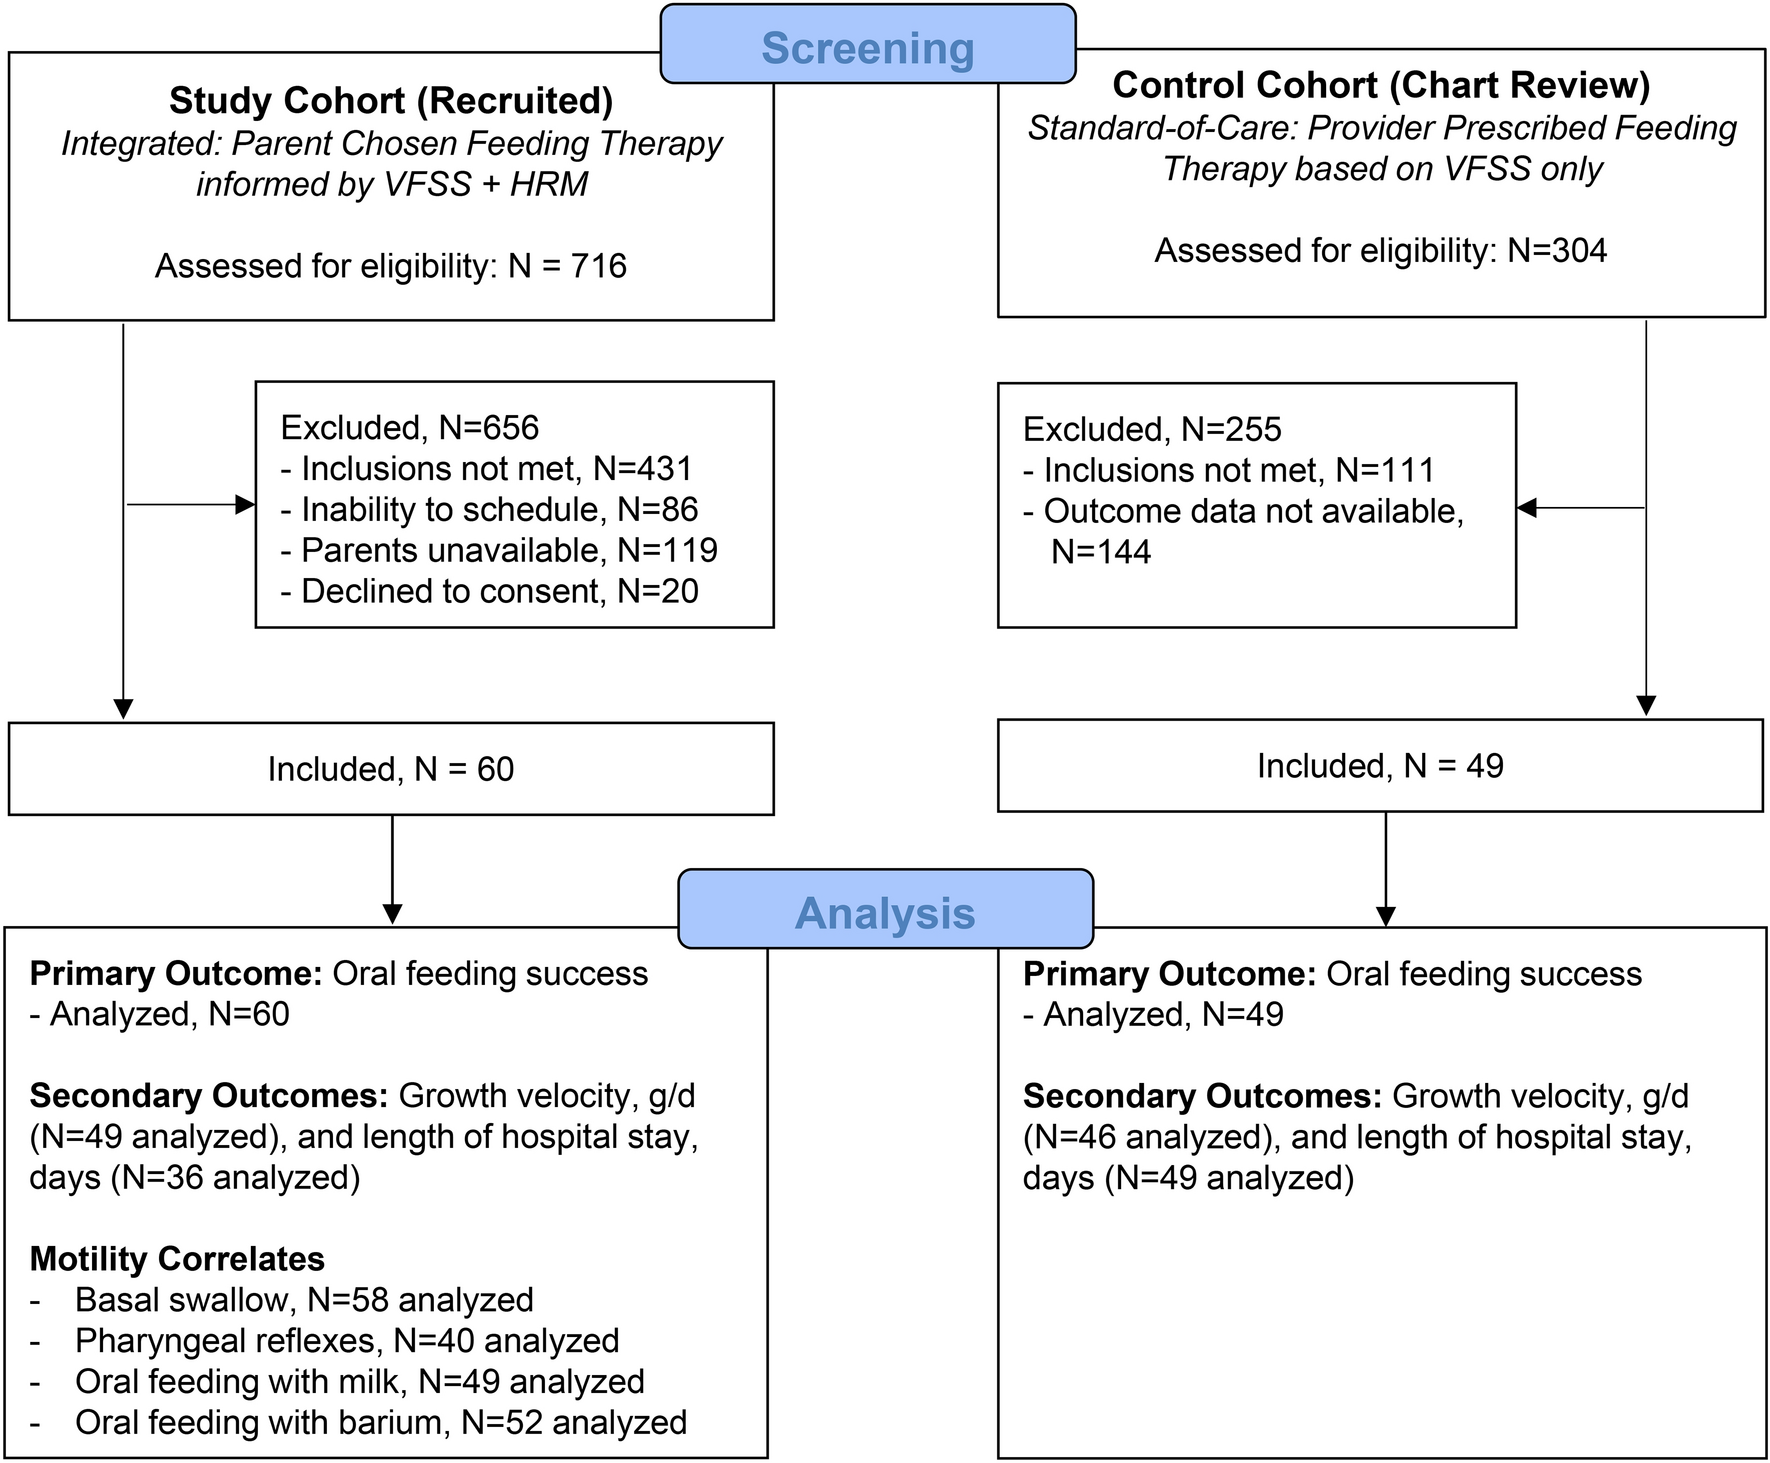 Mechanisms and management considerations of parent-chosen feeding  approaches to infants with swallowing difficulties: an observational study  | Scientific Reports